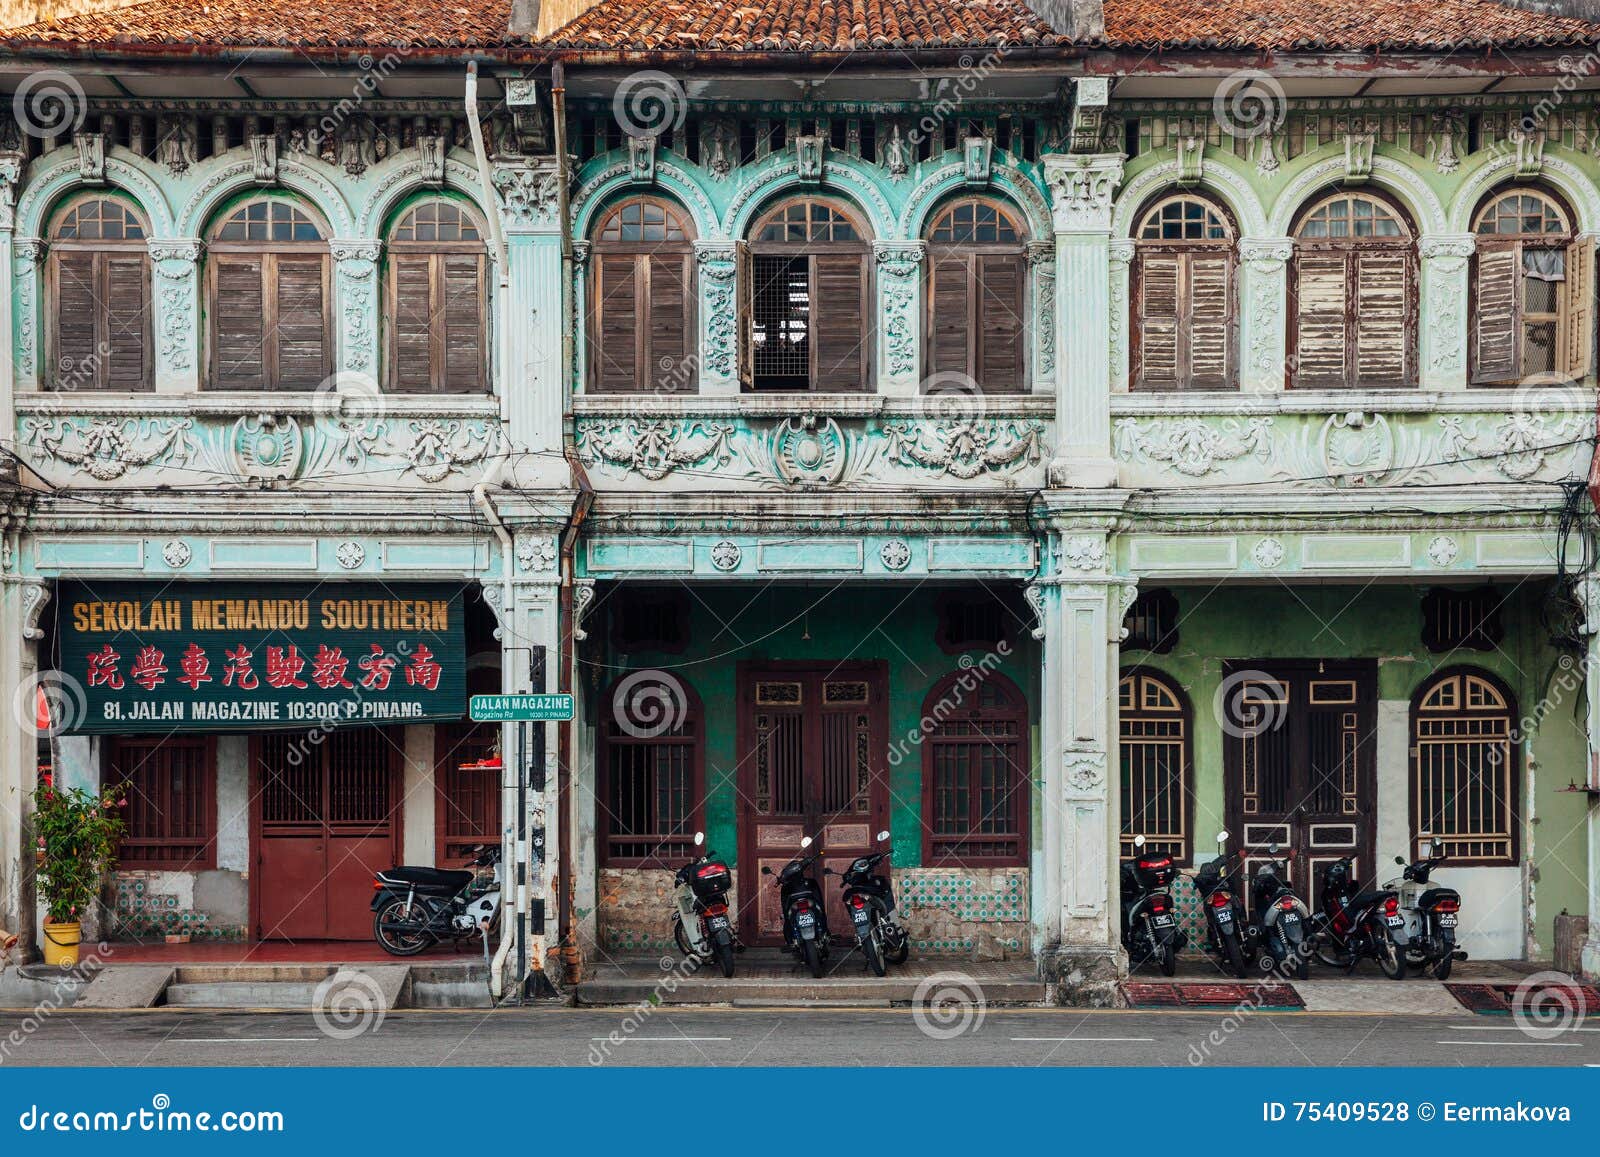 Facade Of The Heritage Building, Penang, Malaysia ...